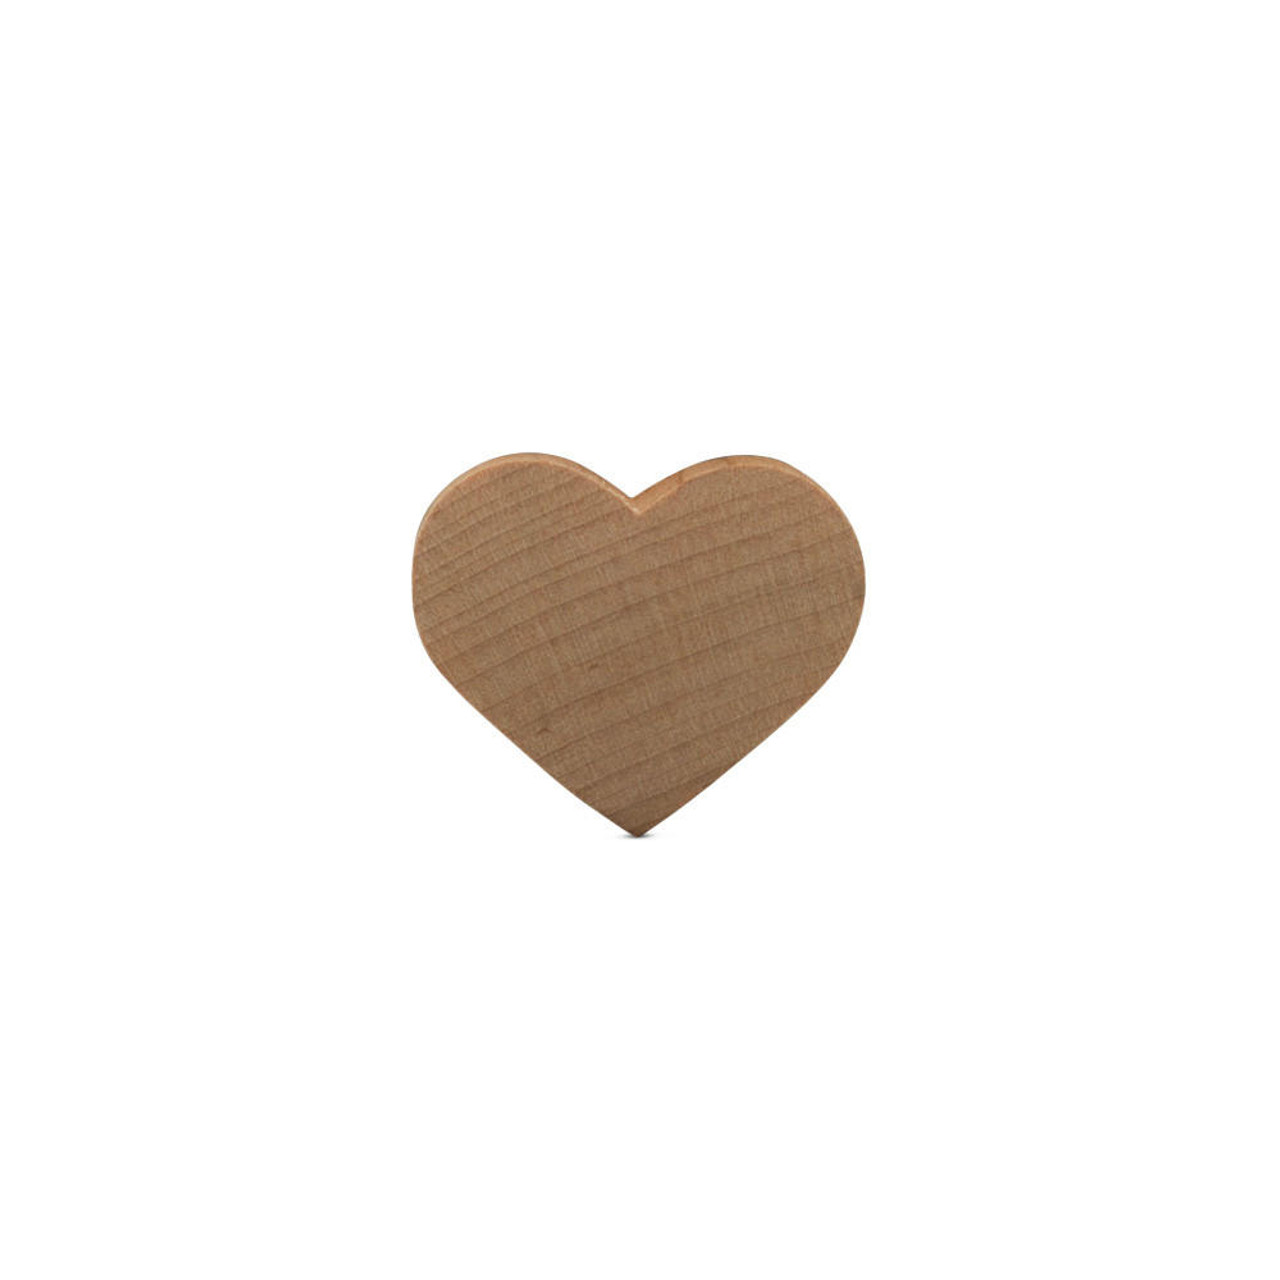  Wooden Heart Cutouts 12 inch, 1/4 inch Thick, Pack of